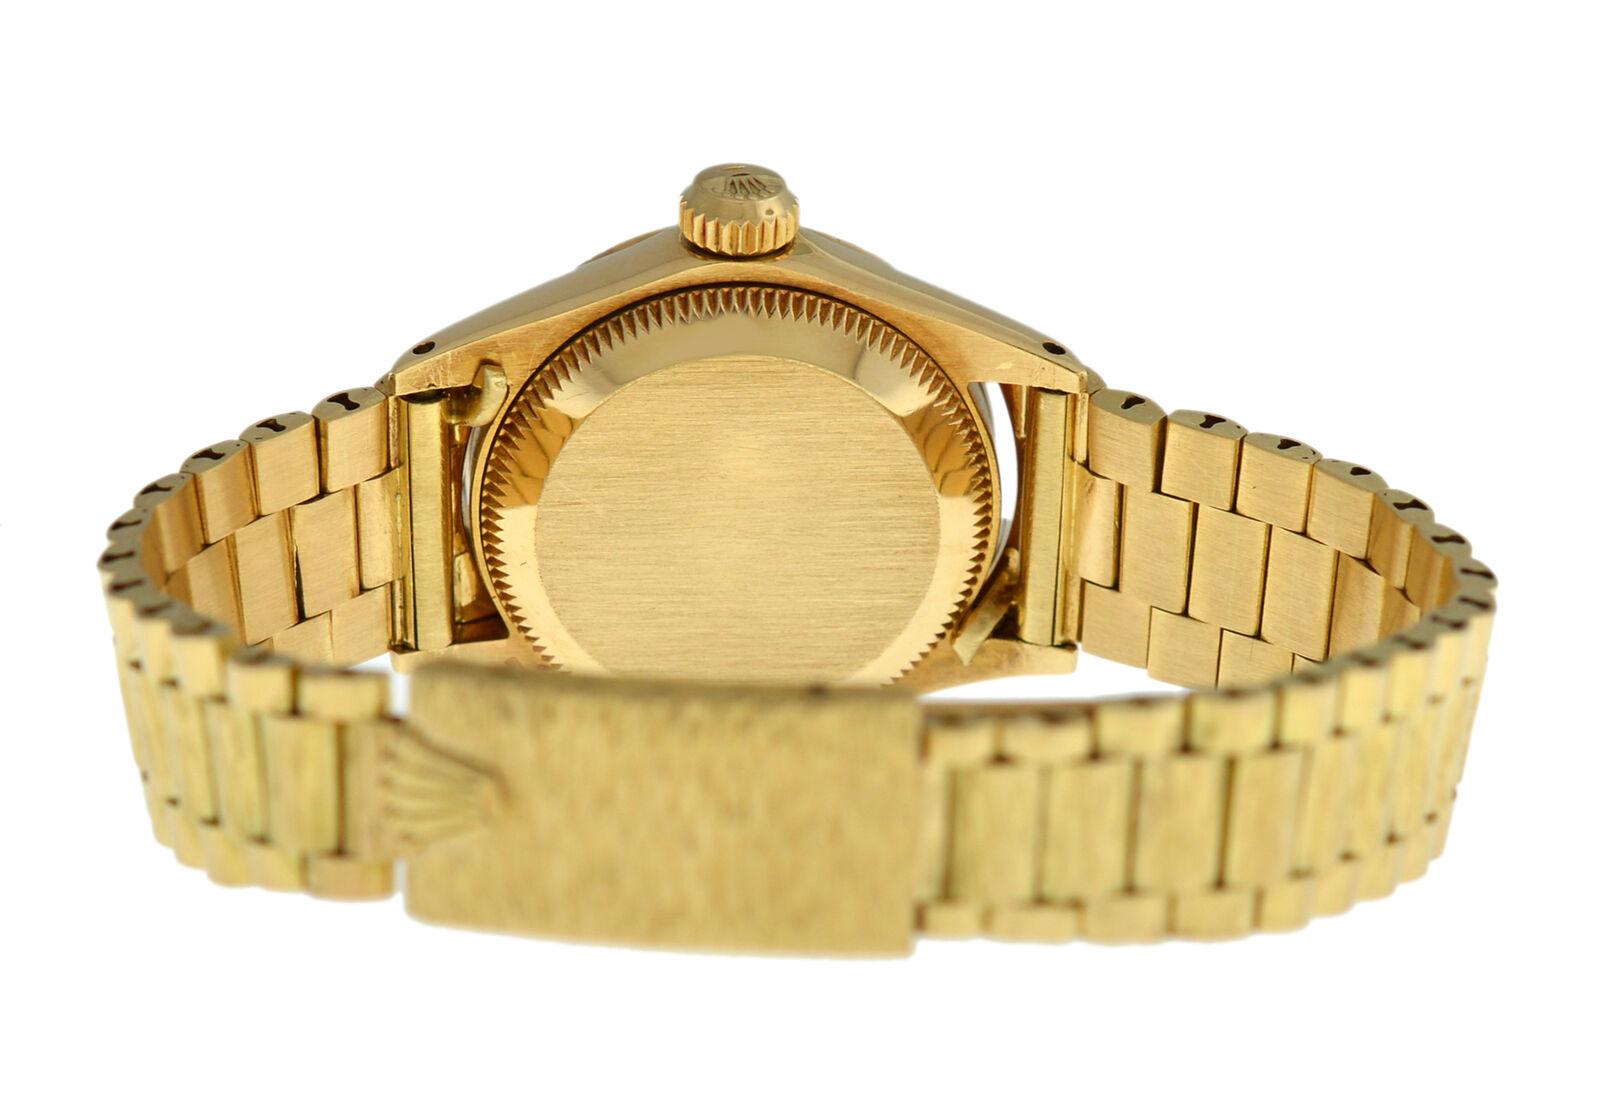 Ladies Rolex Oyster Perpetual Date Just 6701 18 Karat Yellow Gold Watch 2